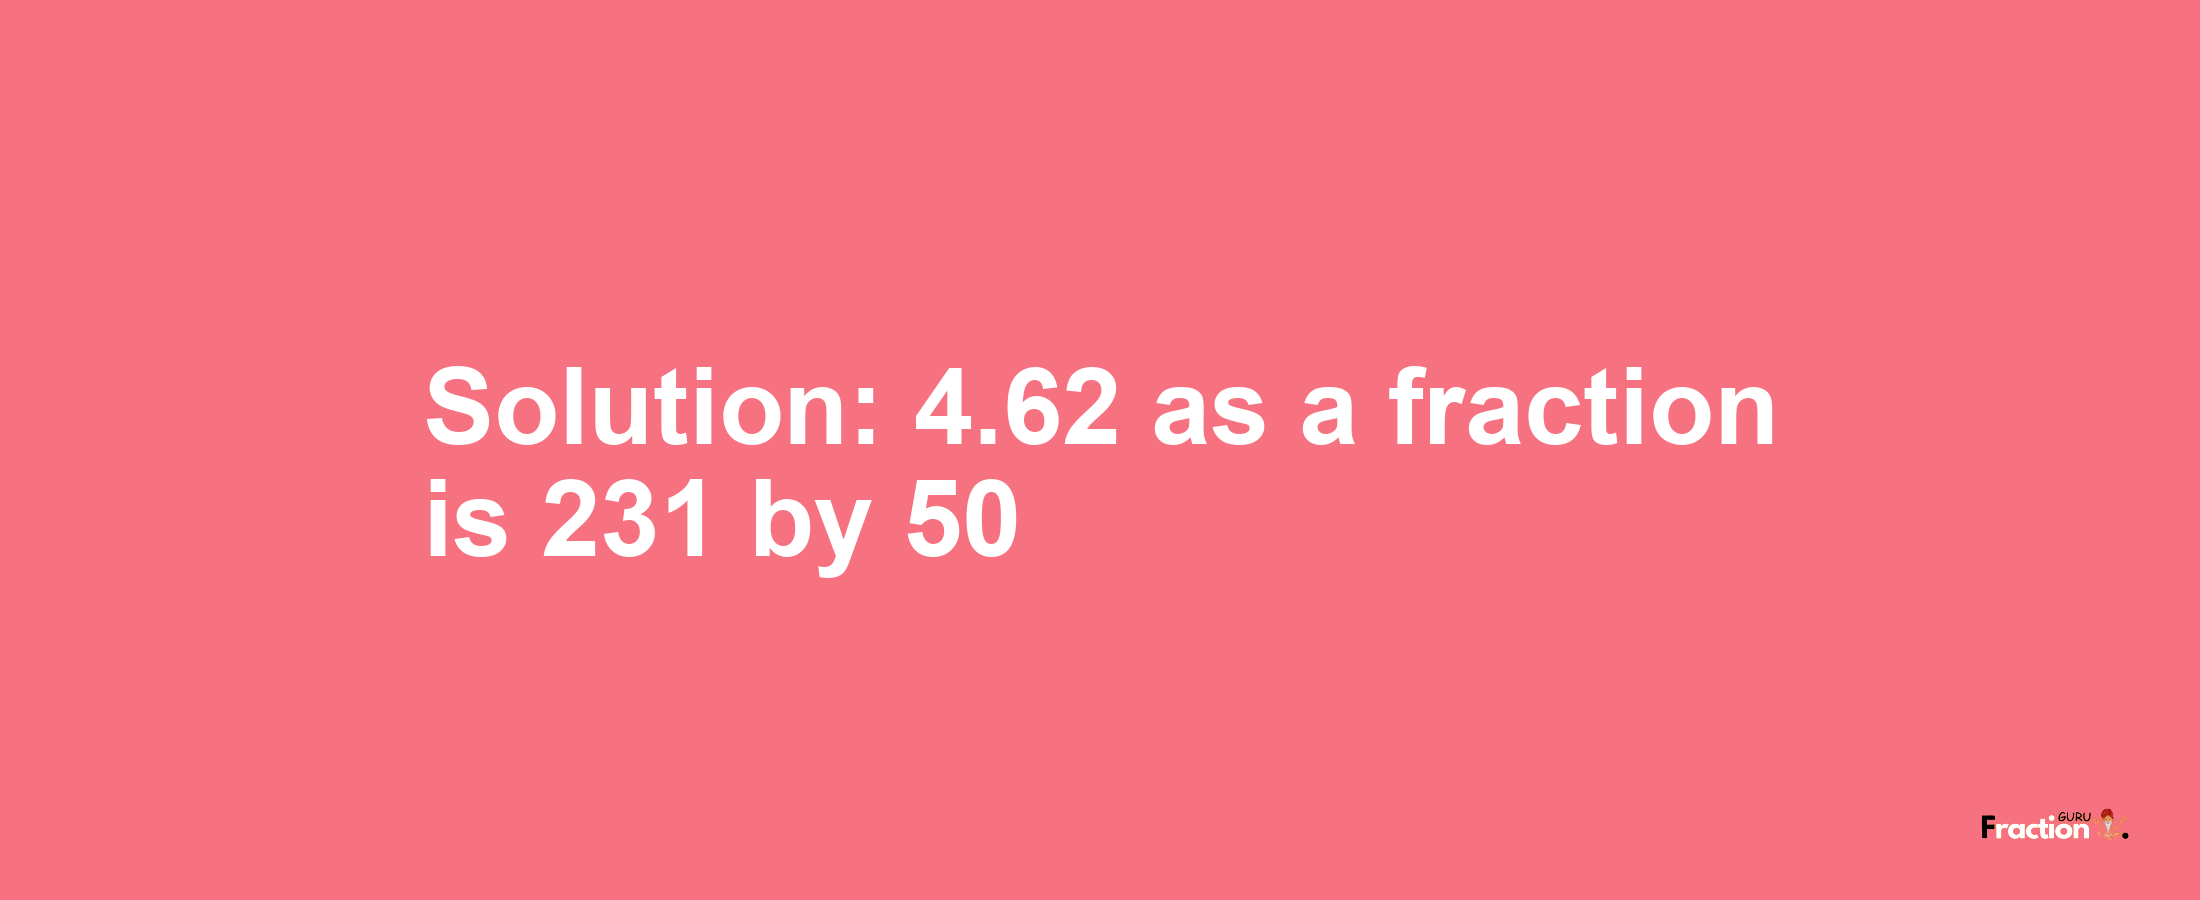 Solution:4.62 as a fraction is 231/50